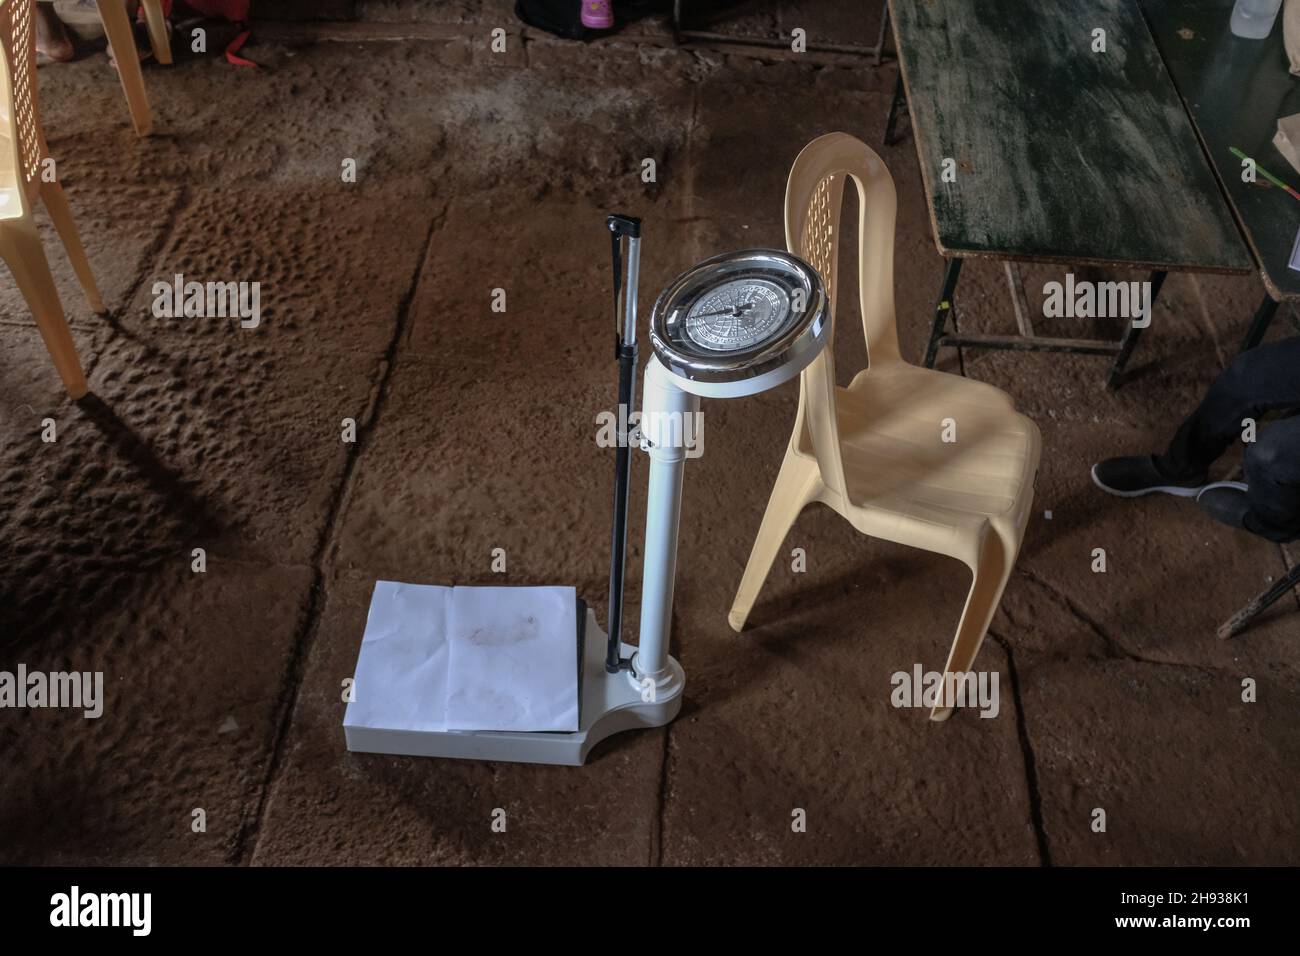 July 23, 2021, Nairobi, Kenya: A Height and Weight machine is seen during the event.Cerebral palsy is an abnormal development of brain tissue that affects children making them unable to control their muscles, this usually occurs before or mostly after a child is born. A group of Medical experts and massage therapists from The Action Foundation (T.A.F) came together to help and supports different families with young kids suffering from Cerebral Palsy. Since most families are not able to afford the high costs of medical services and therapies for their babies with disabilities, The Action Found Stock Photo